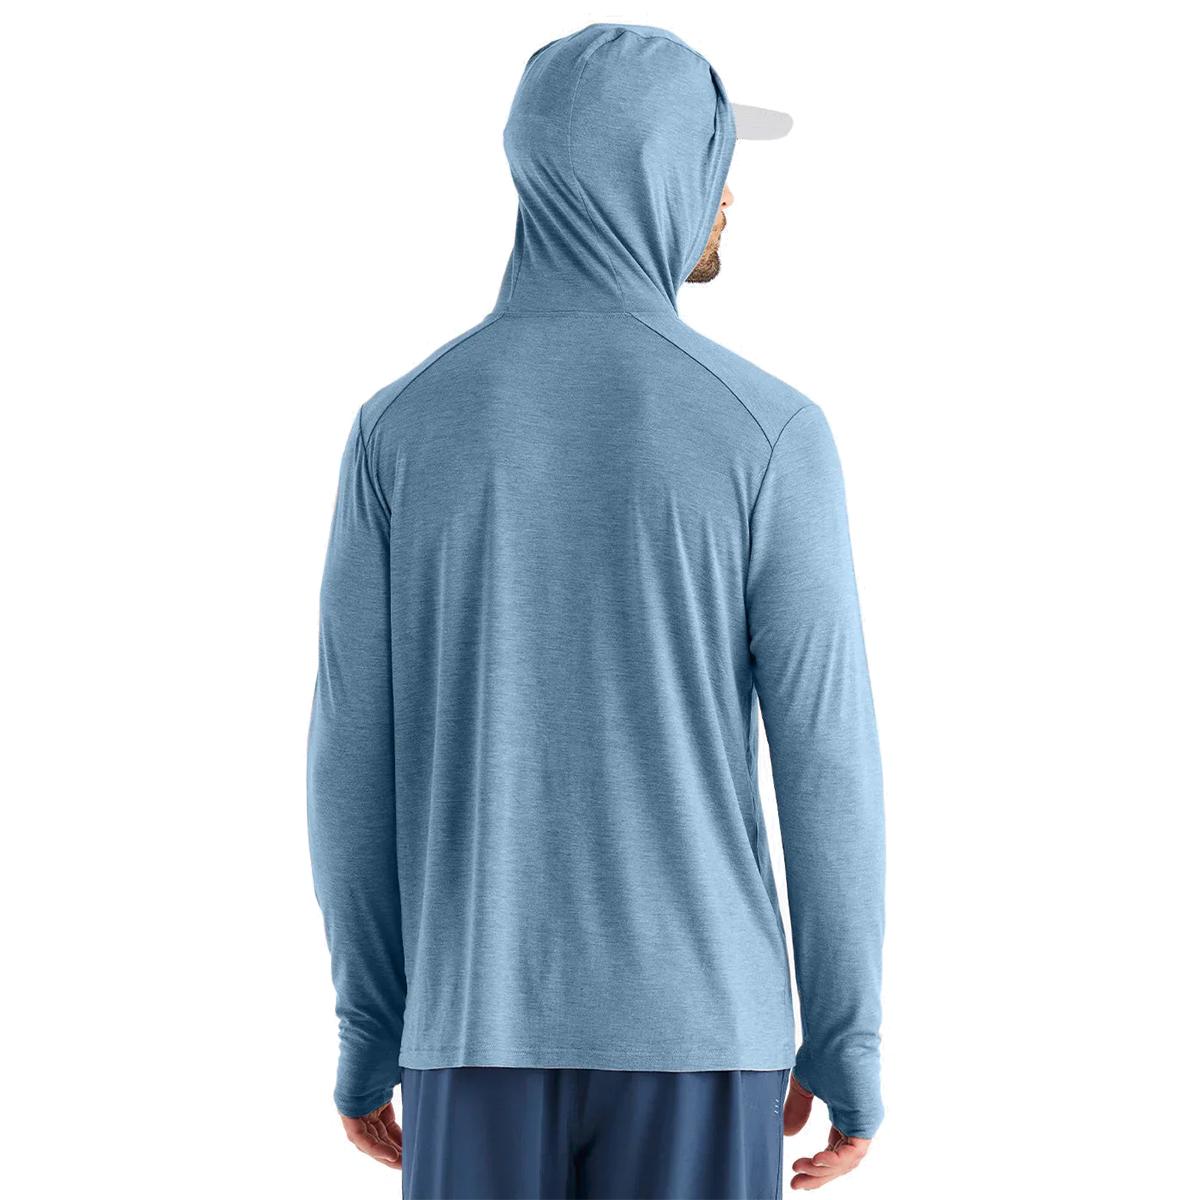 Free Fly Bamboo Shade Hoodie - Men's